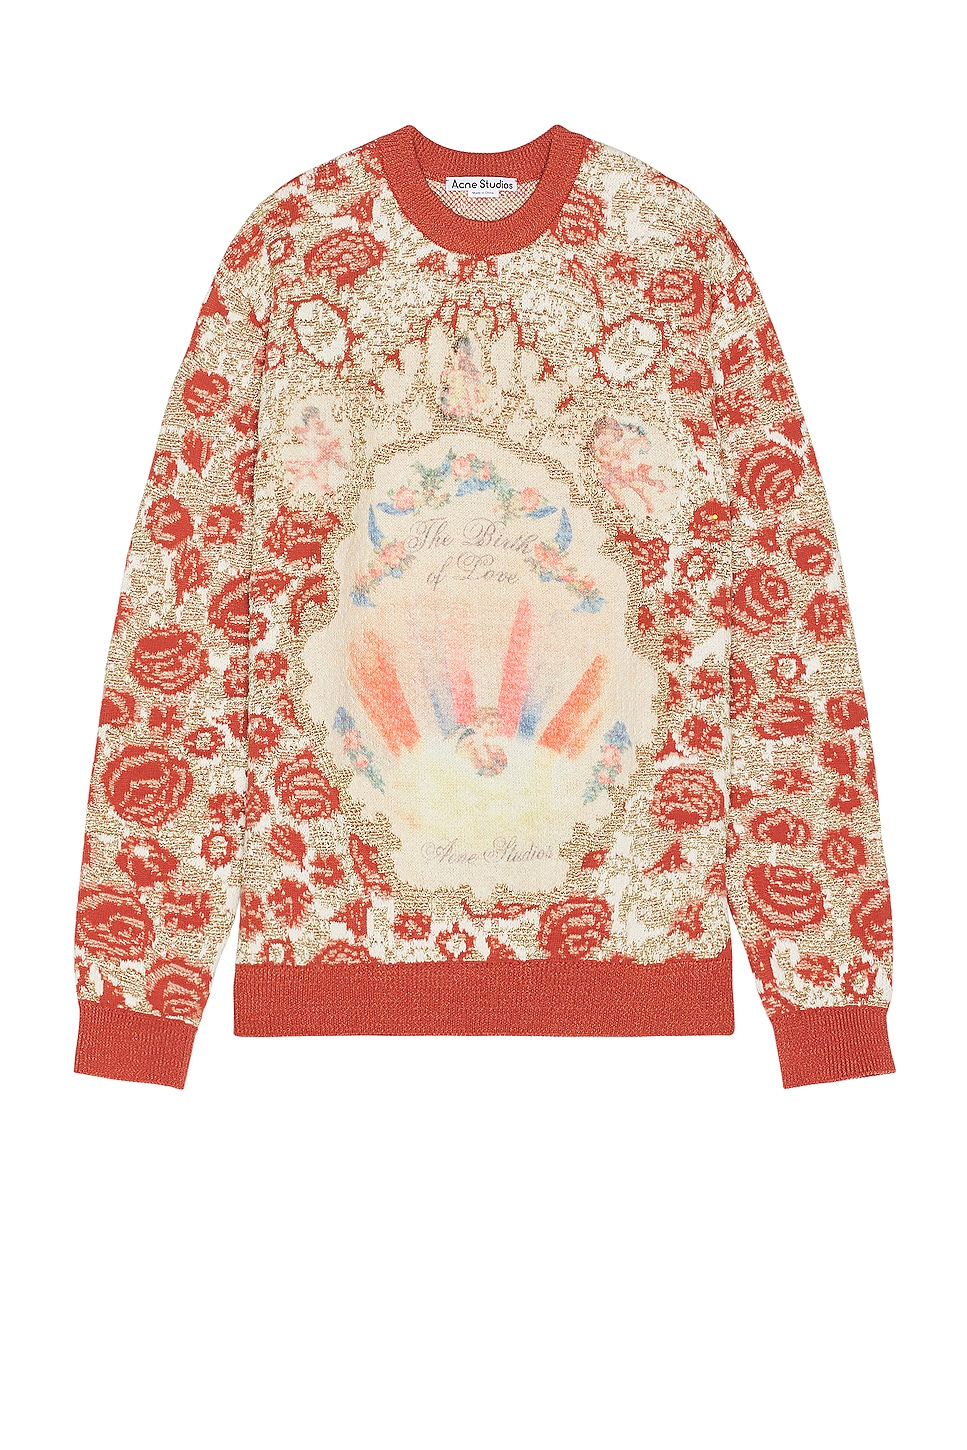 Image 1 of Acne Studios Graphic Sweater in Blossom Pink & Gold